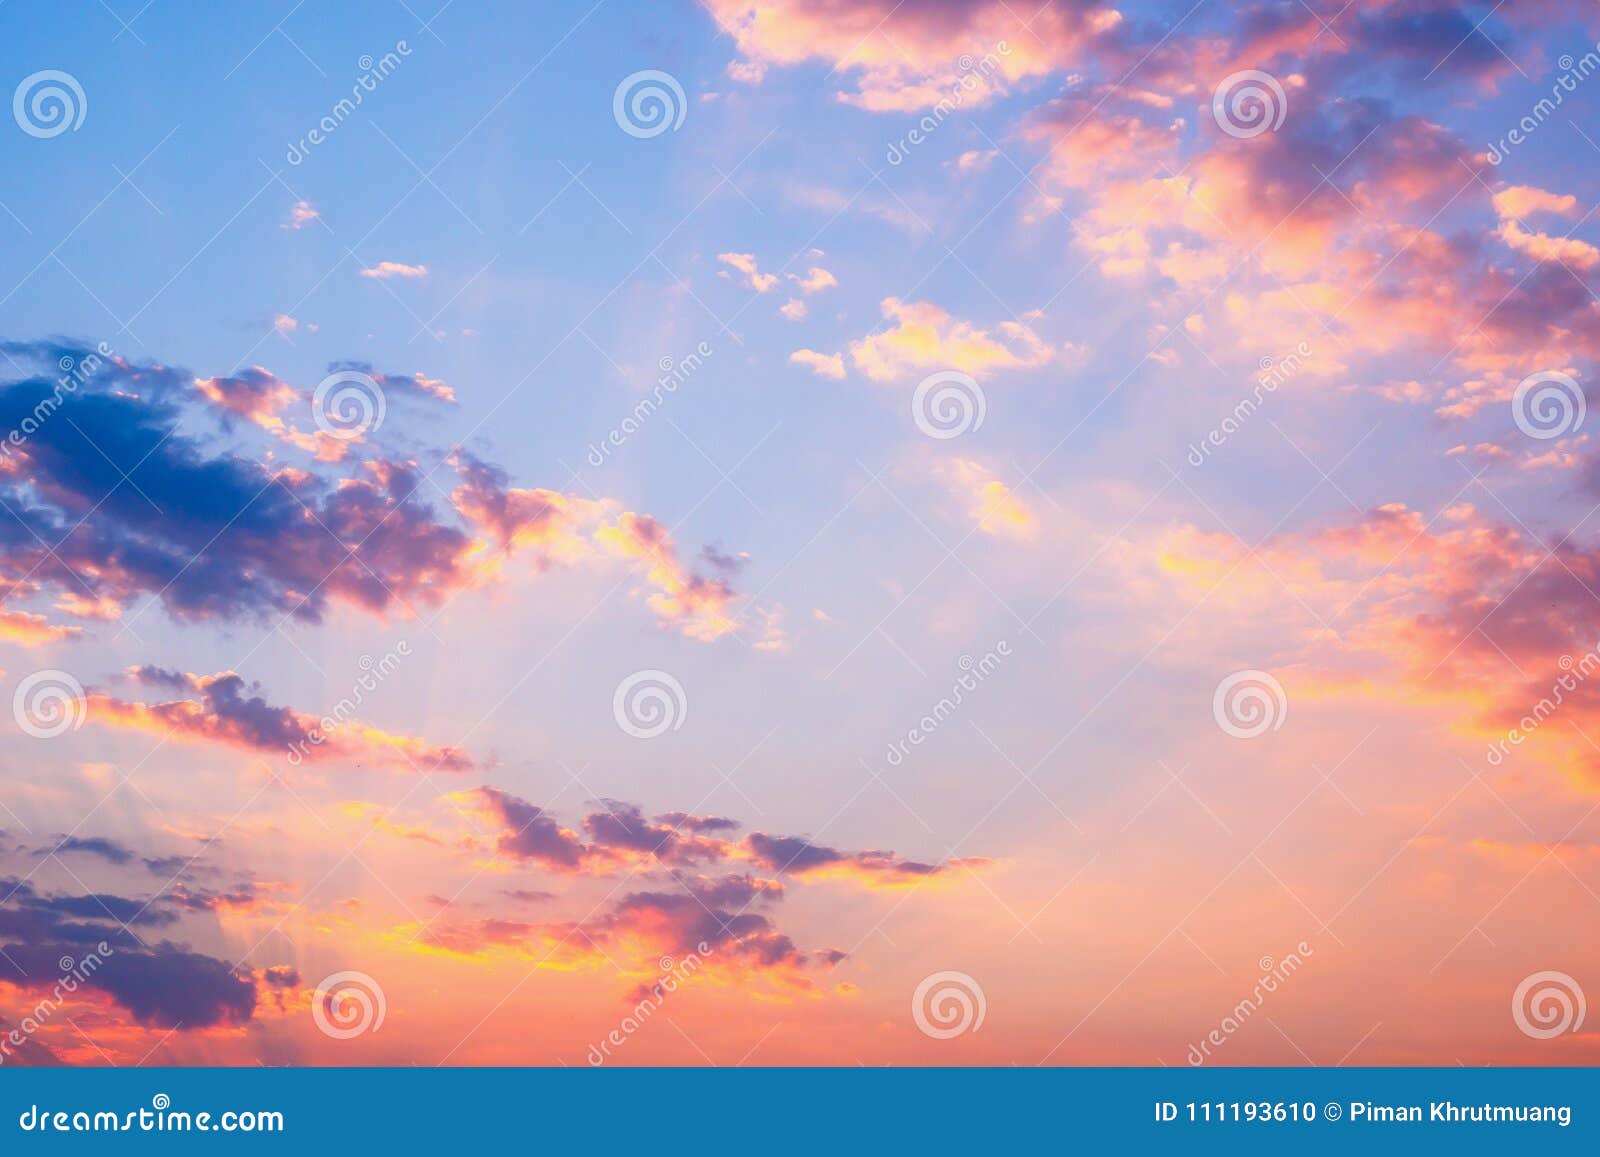 Abstract Sunset Sky with Clouds Nature Background Stock Photo - Image of  heaven, morning: 111193610